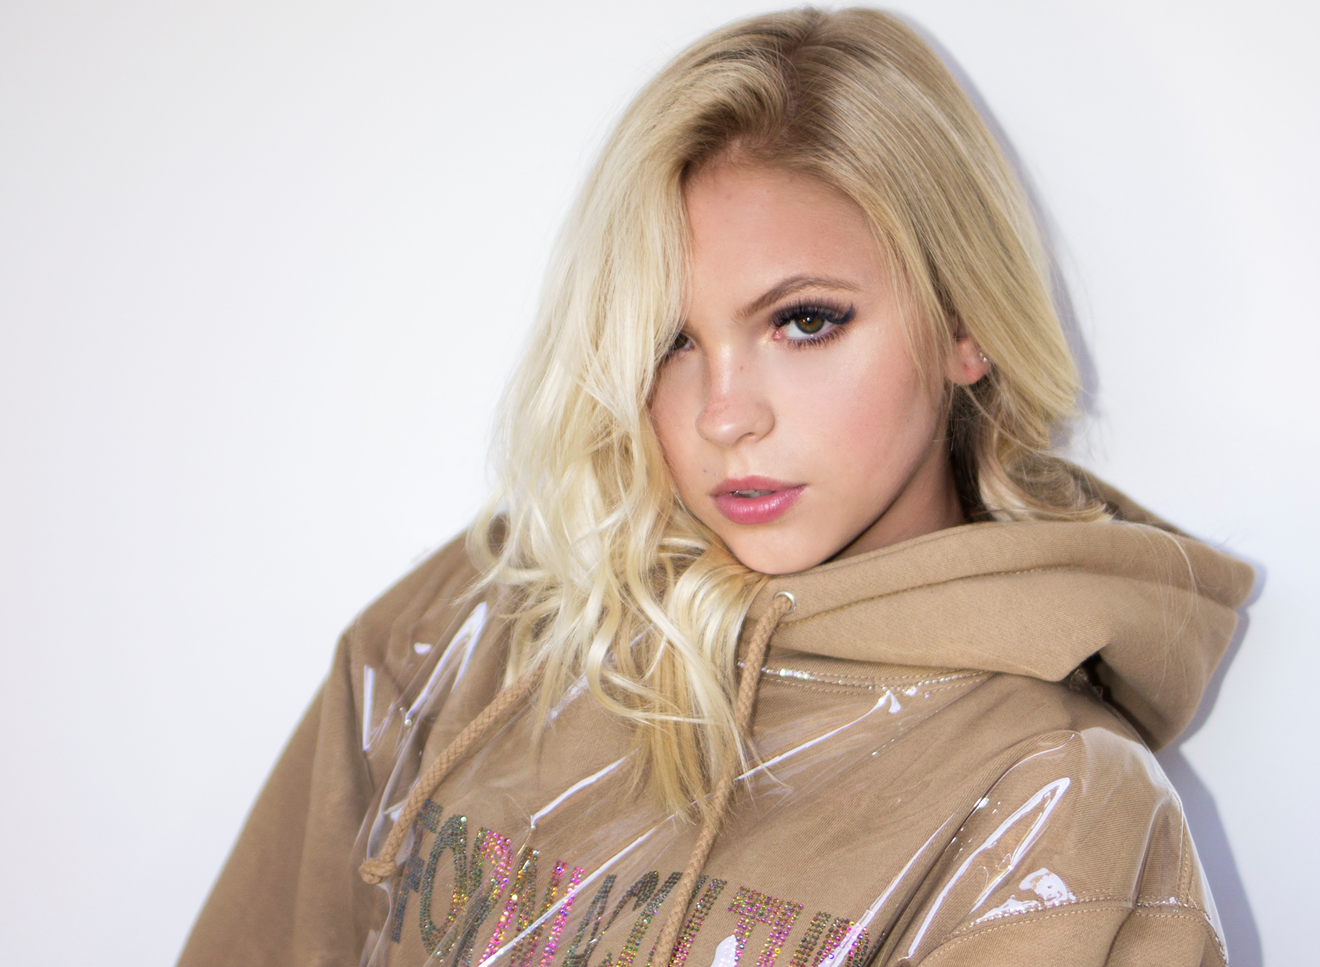 Jordyn Jones aims to push past her role as a "social media influencer" into more traditional muisc